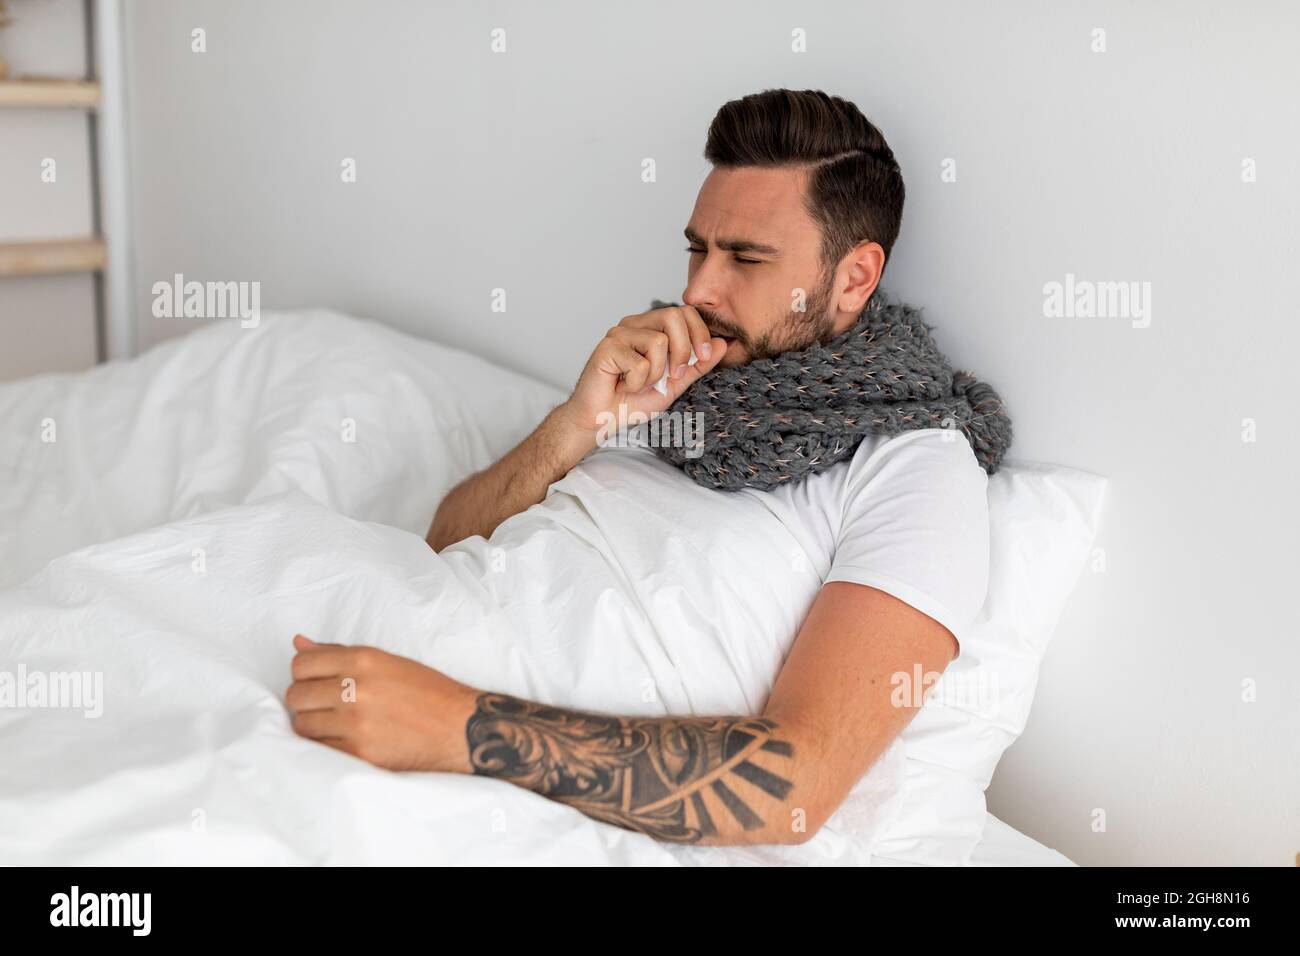 Covid-19. Sick guy coughing, suffering coronavirus pneumonia, sitting in bed under blanket, free space Stock Photo